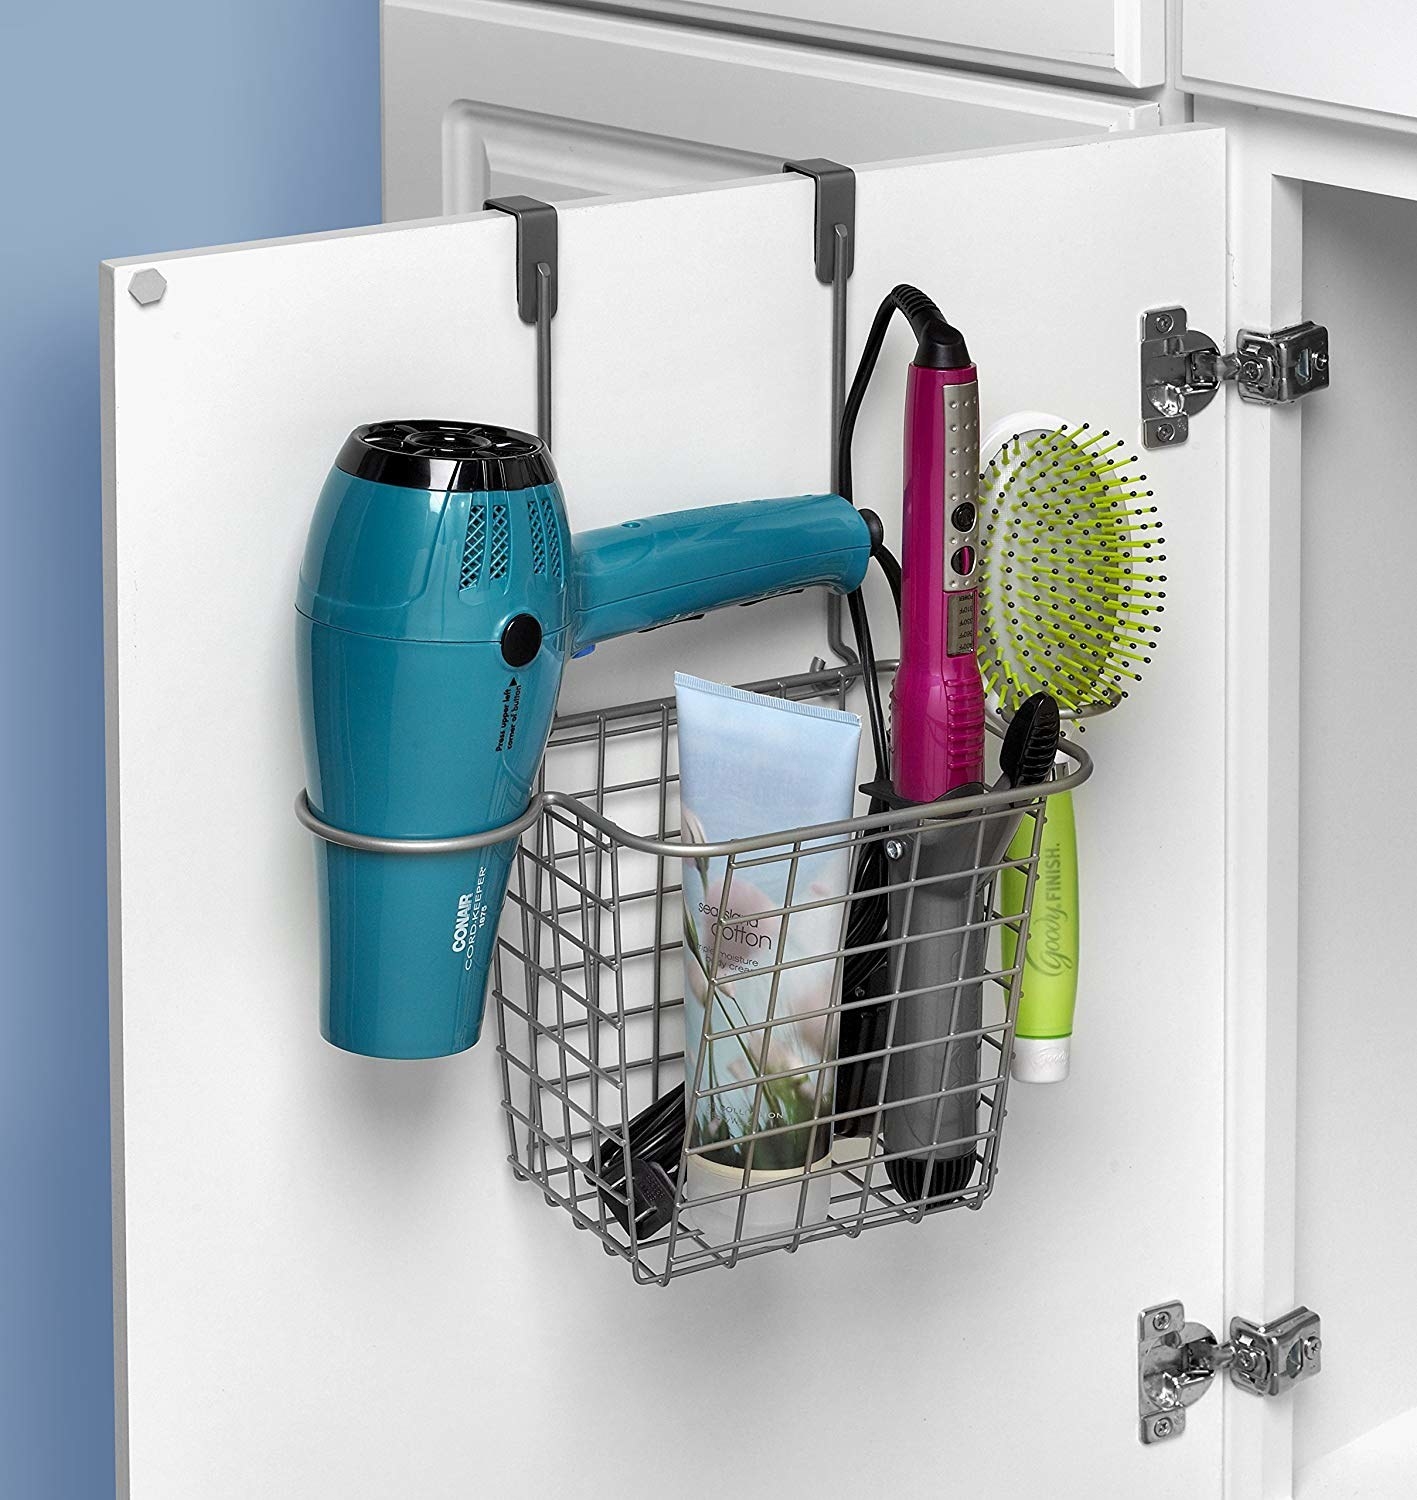 The tool holder with brushes and toiletries on it